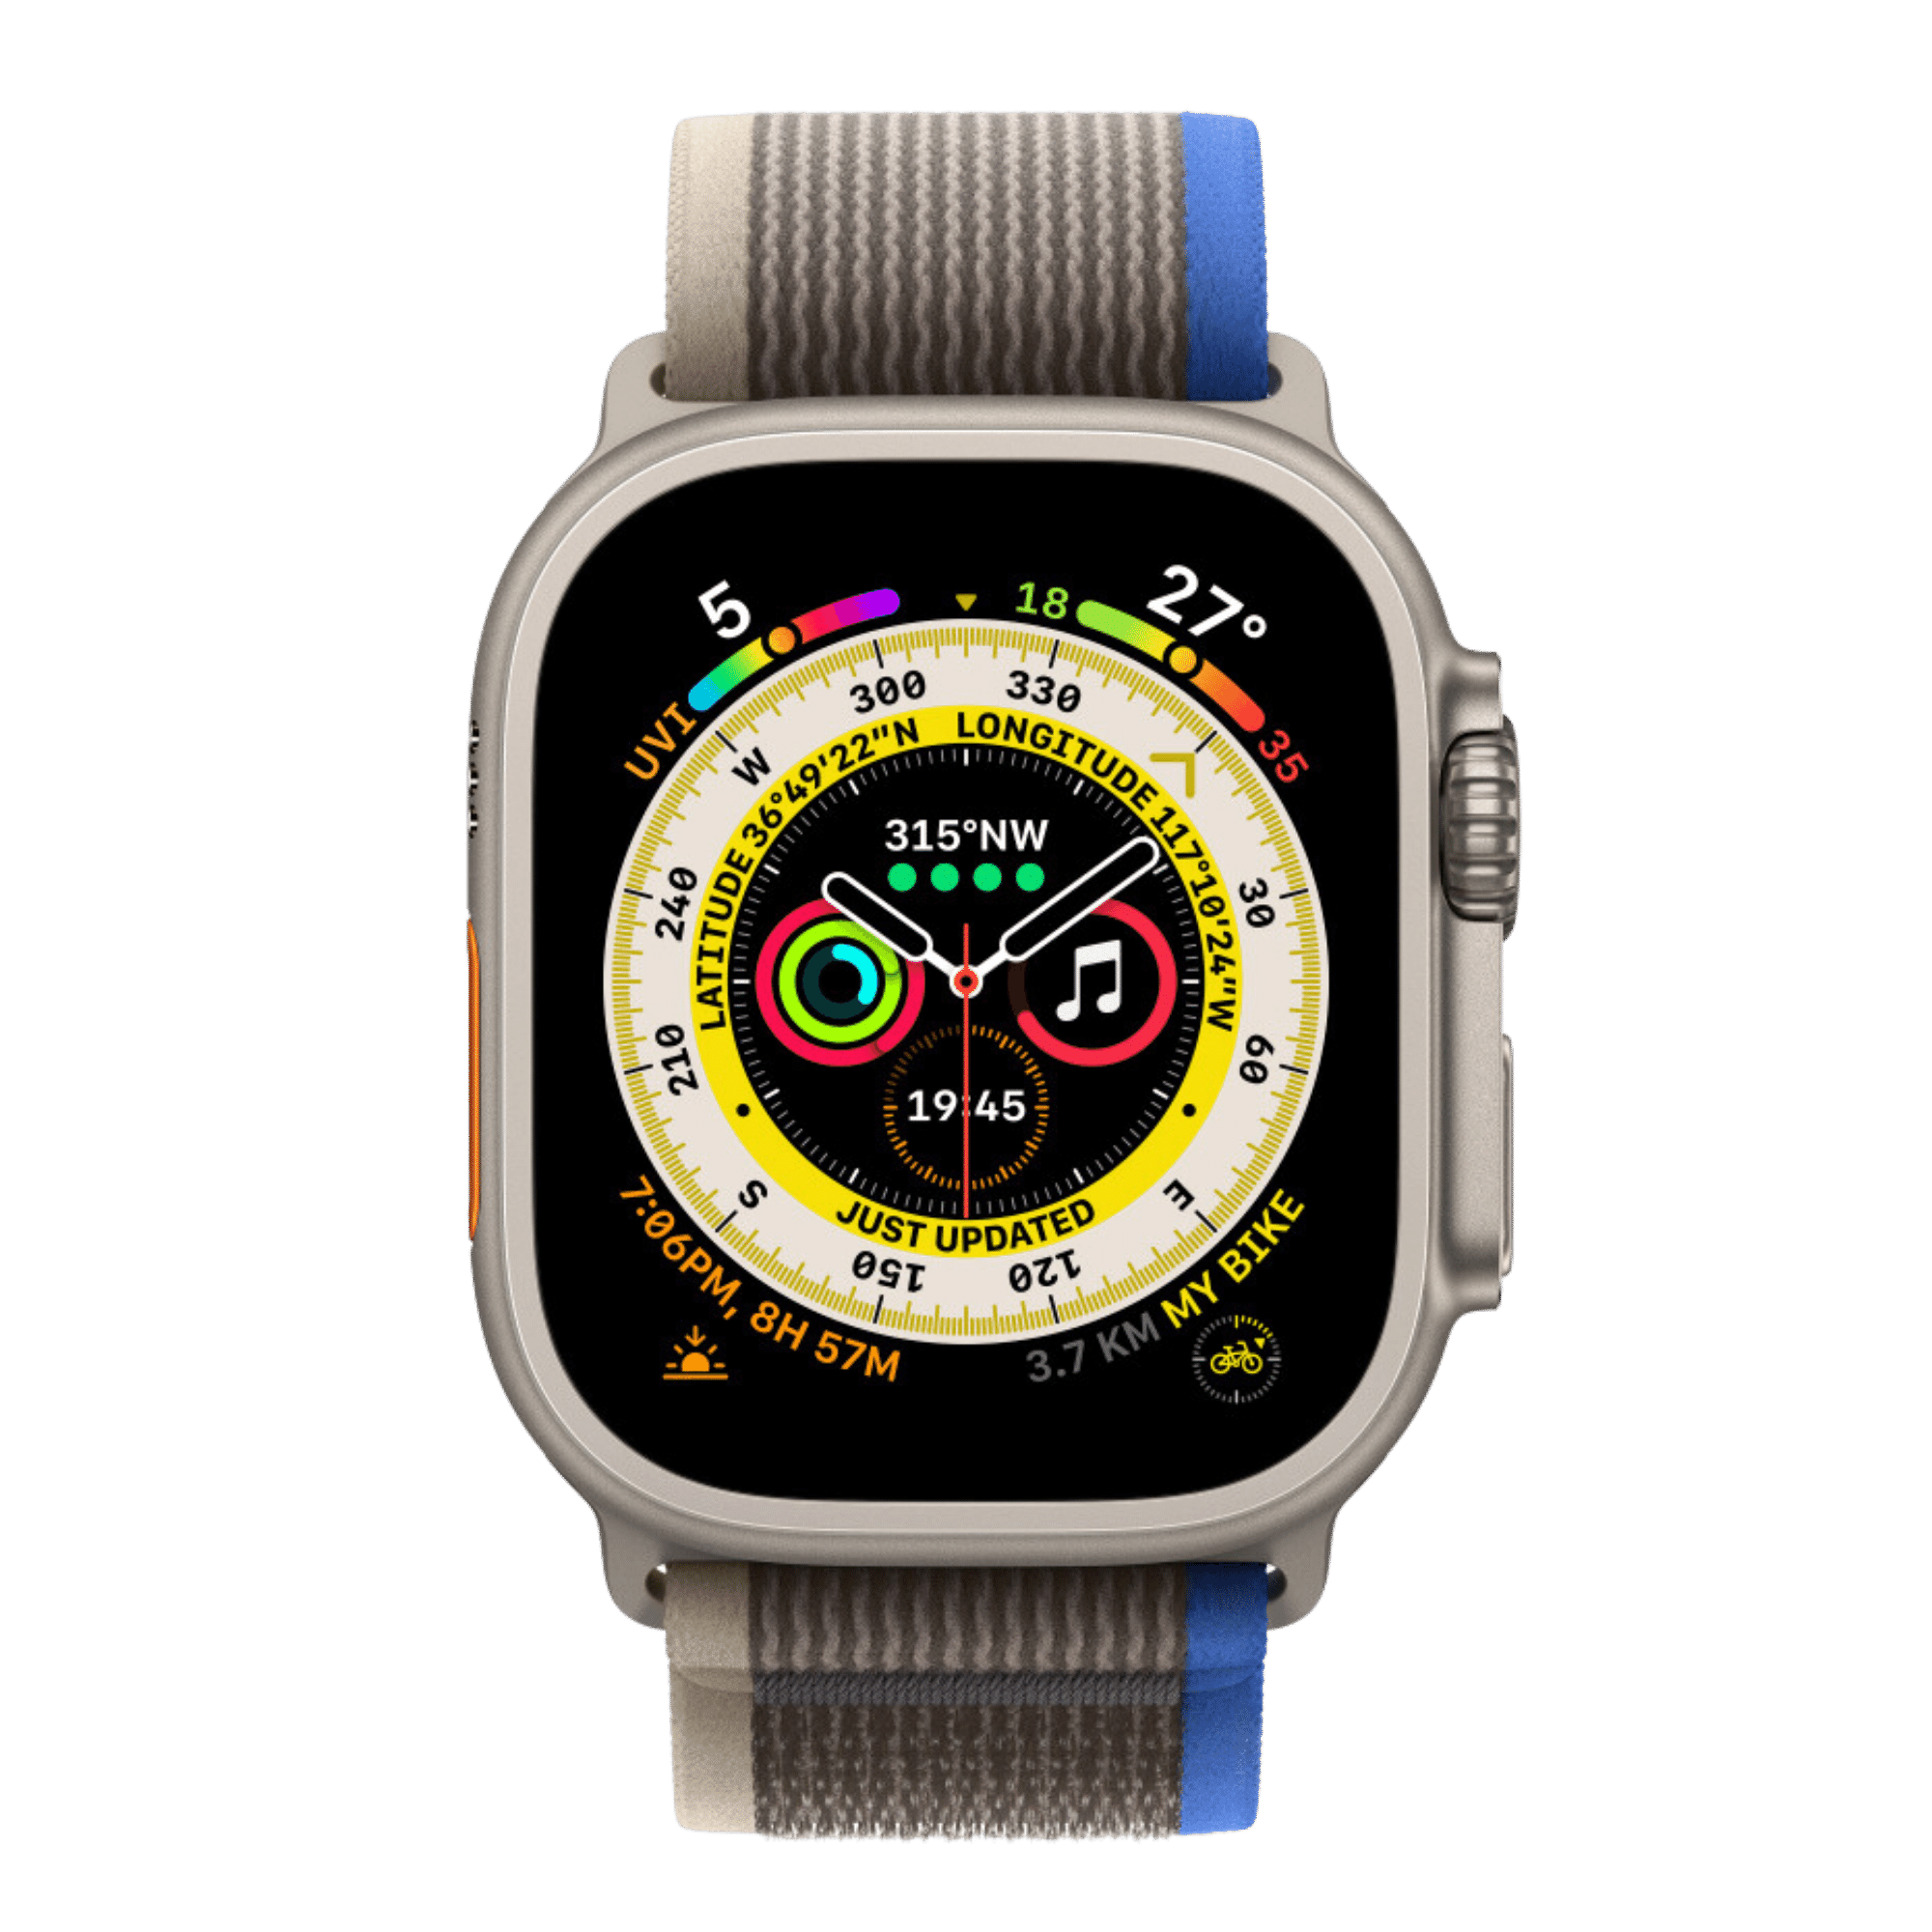 Casio A168W-1 - Lee Byung-hun / Front Man - Squid Game | Watch ID